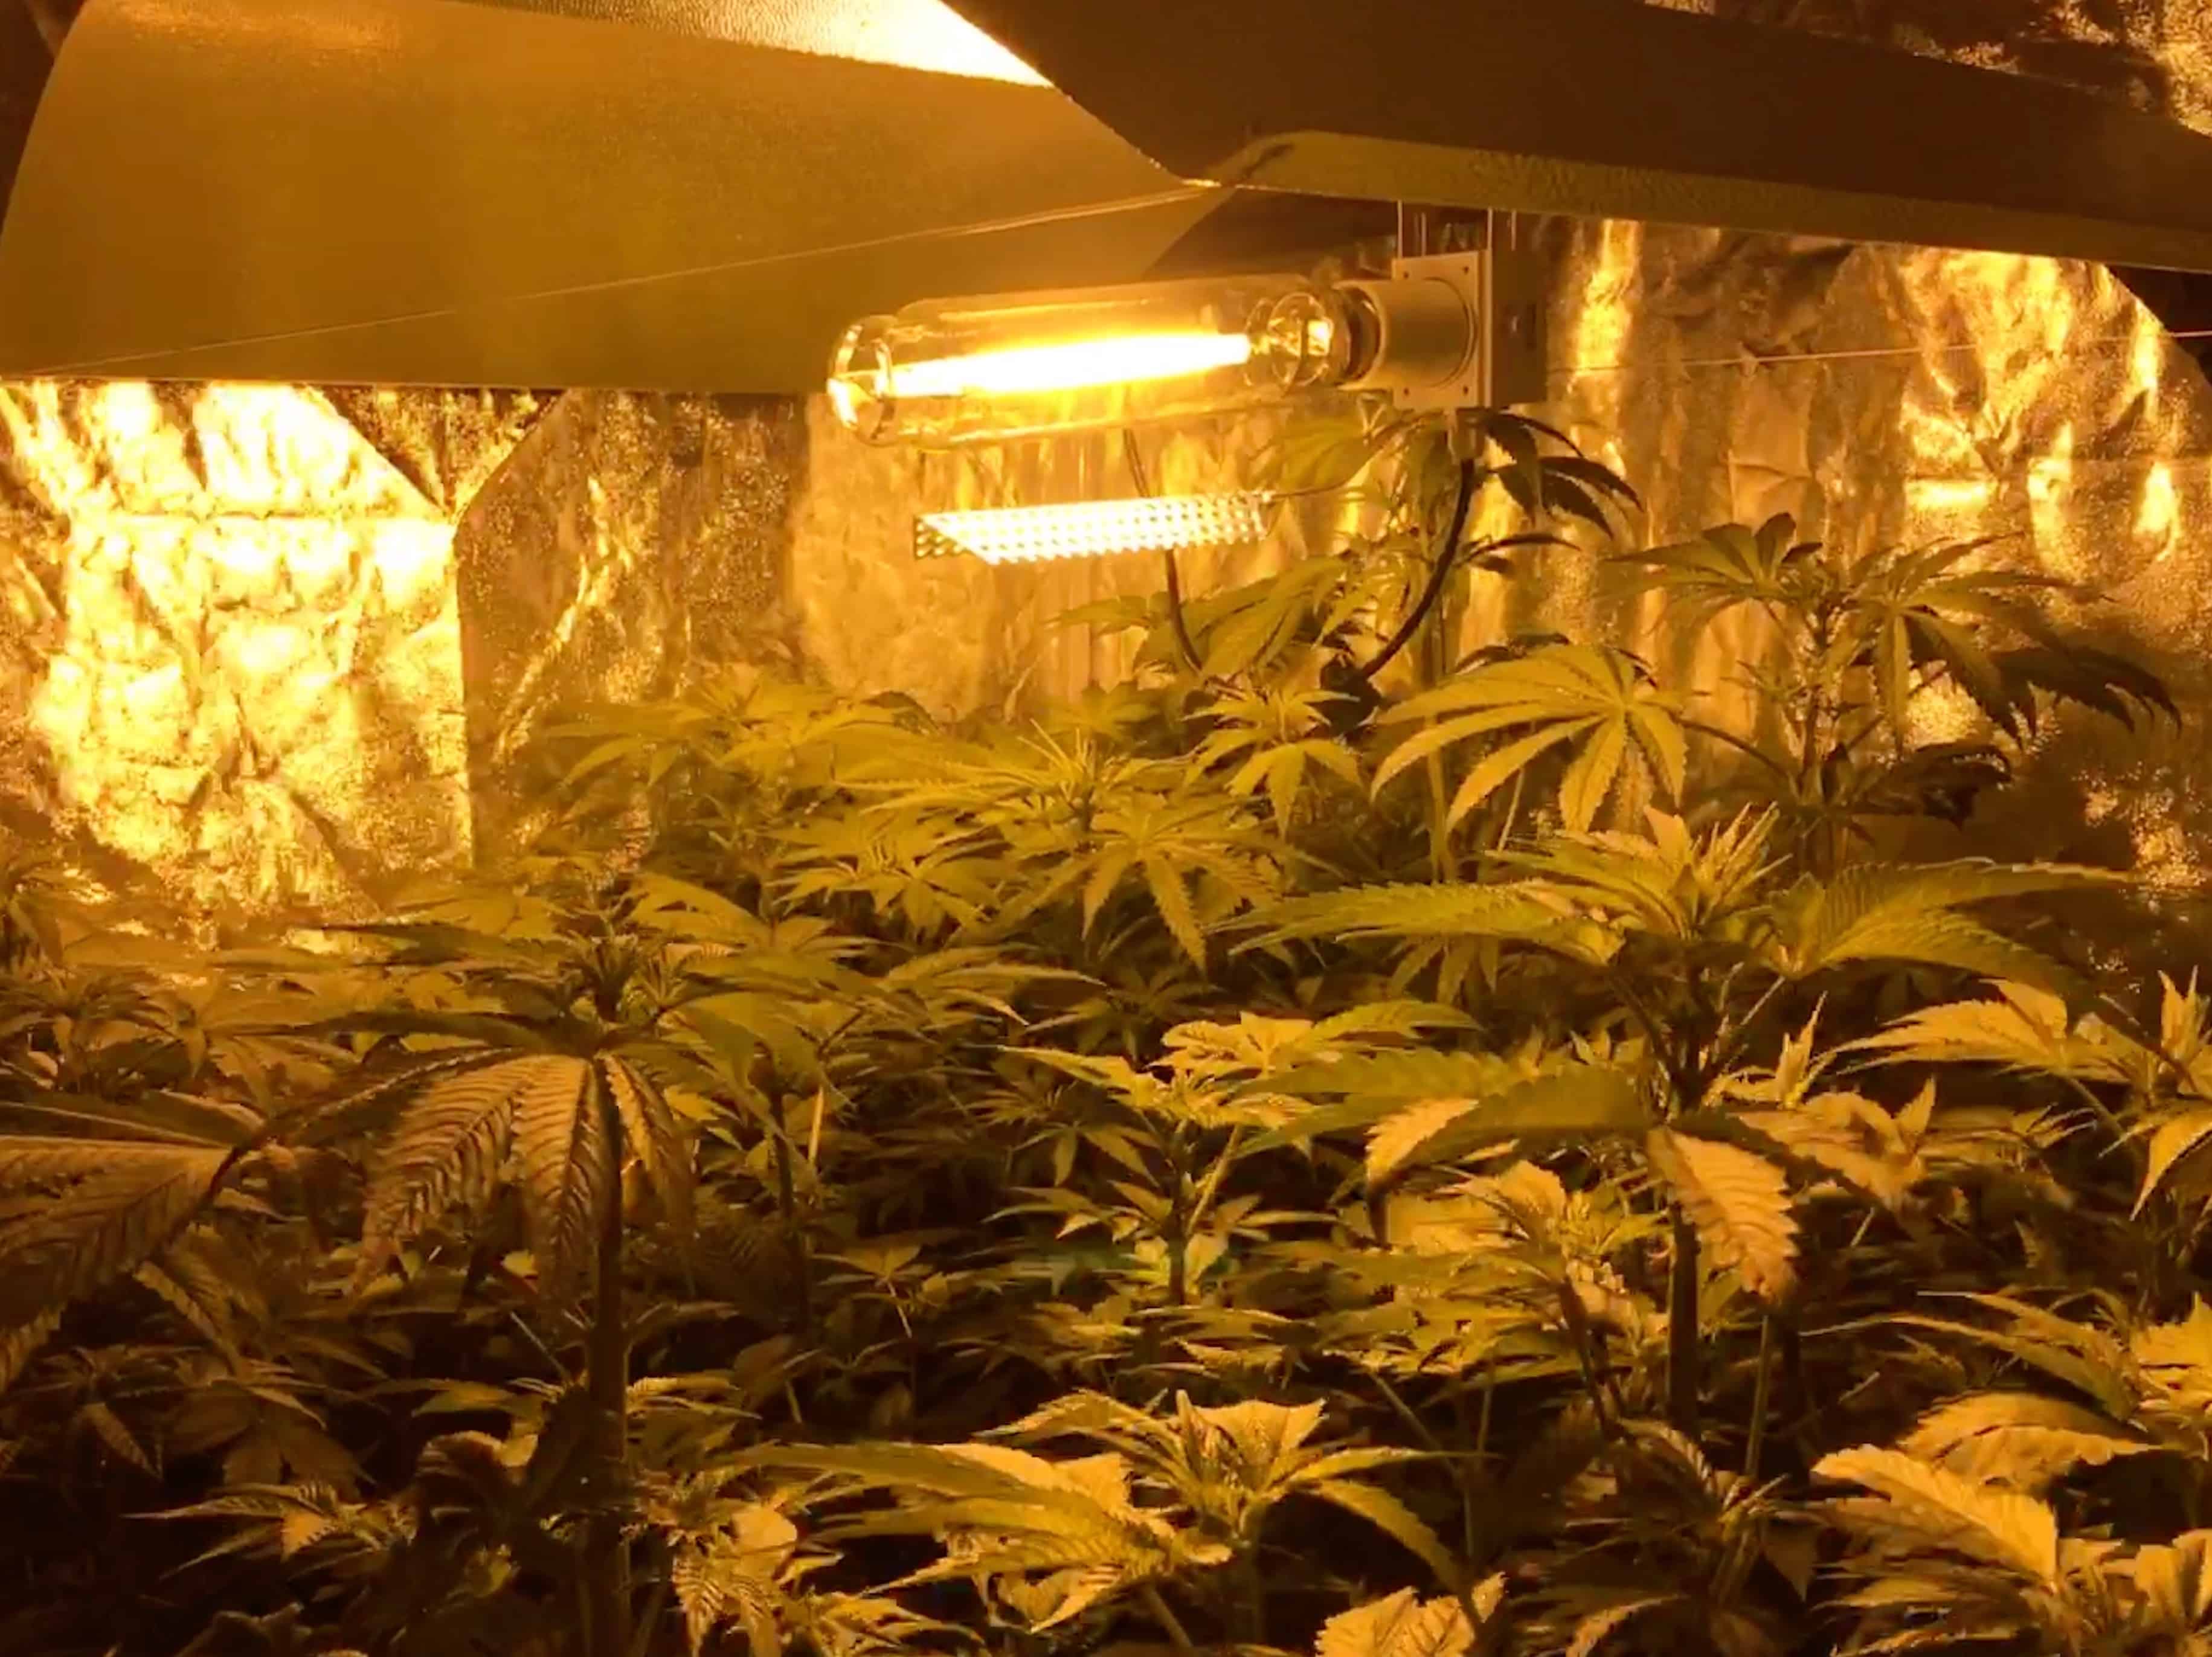 Growing cannabis indoors - Lamps